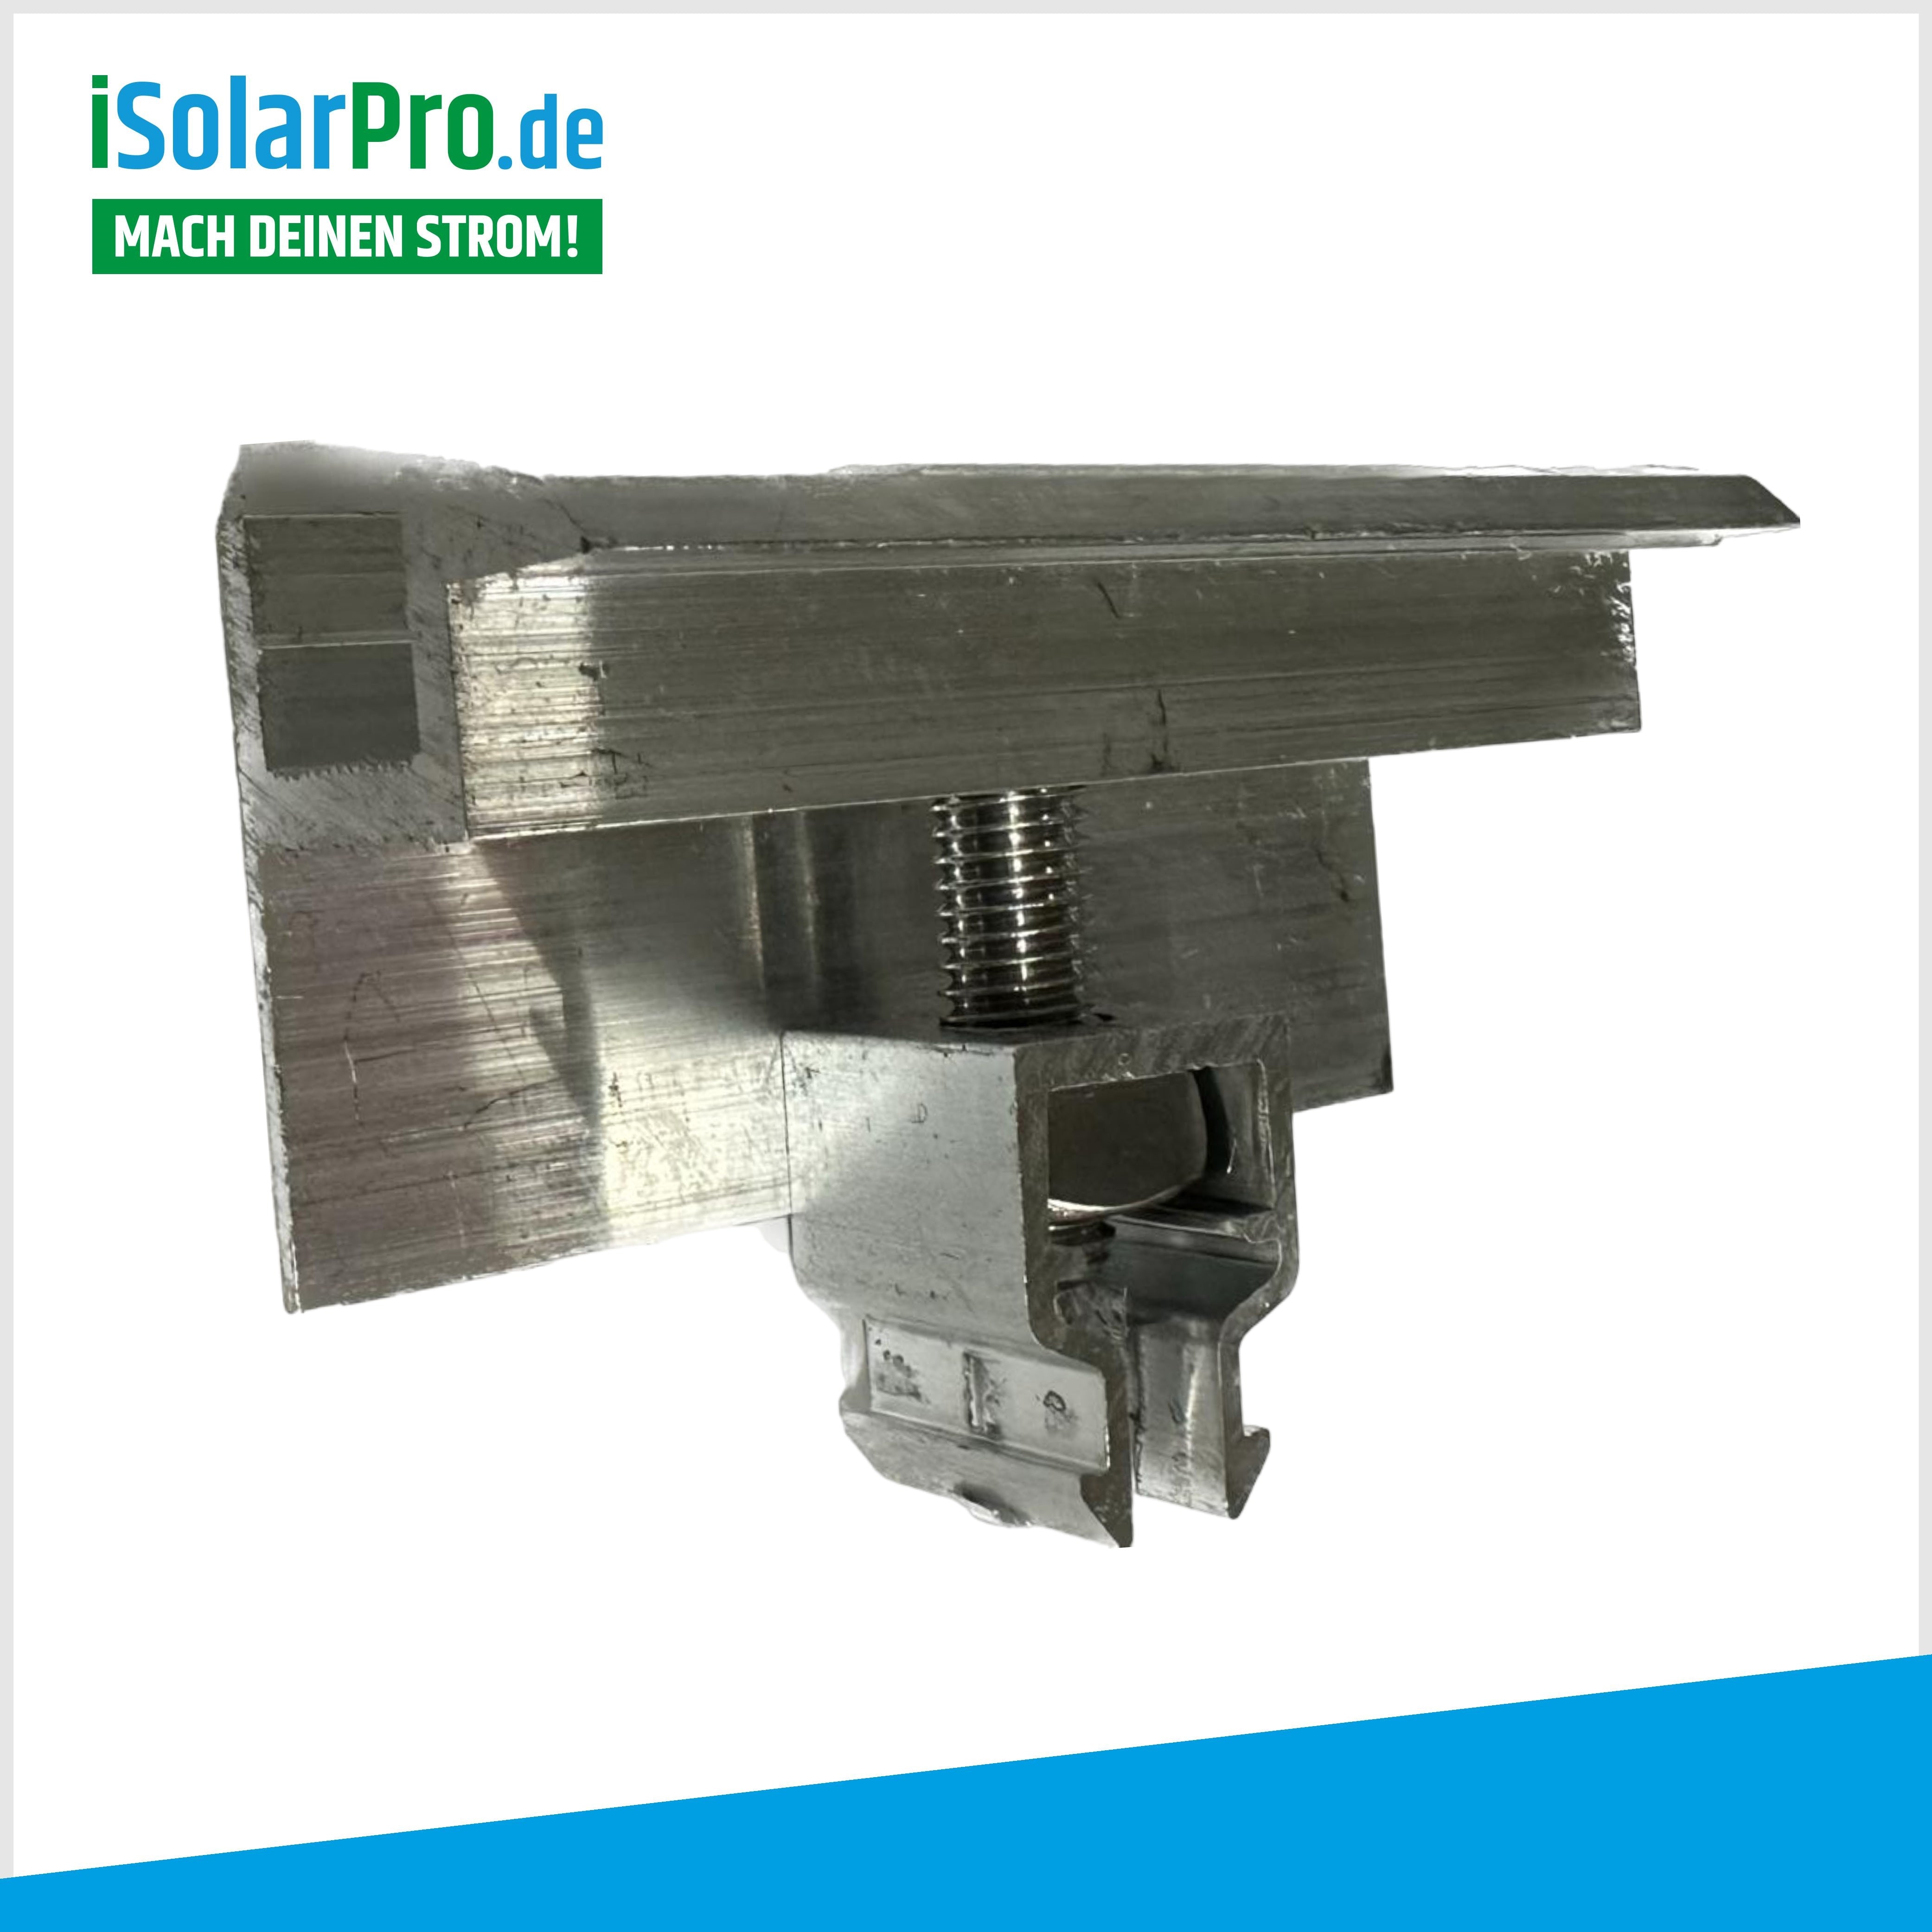 End clamp ALU Klickfix 35mm for solar modules, photovoltaic PV mounting 